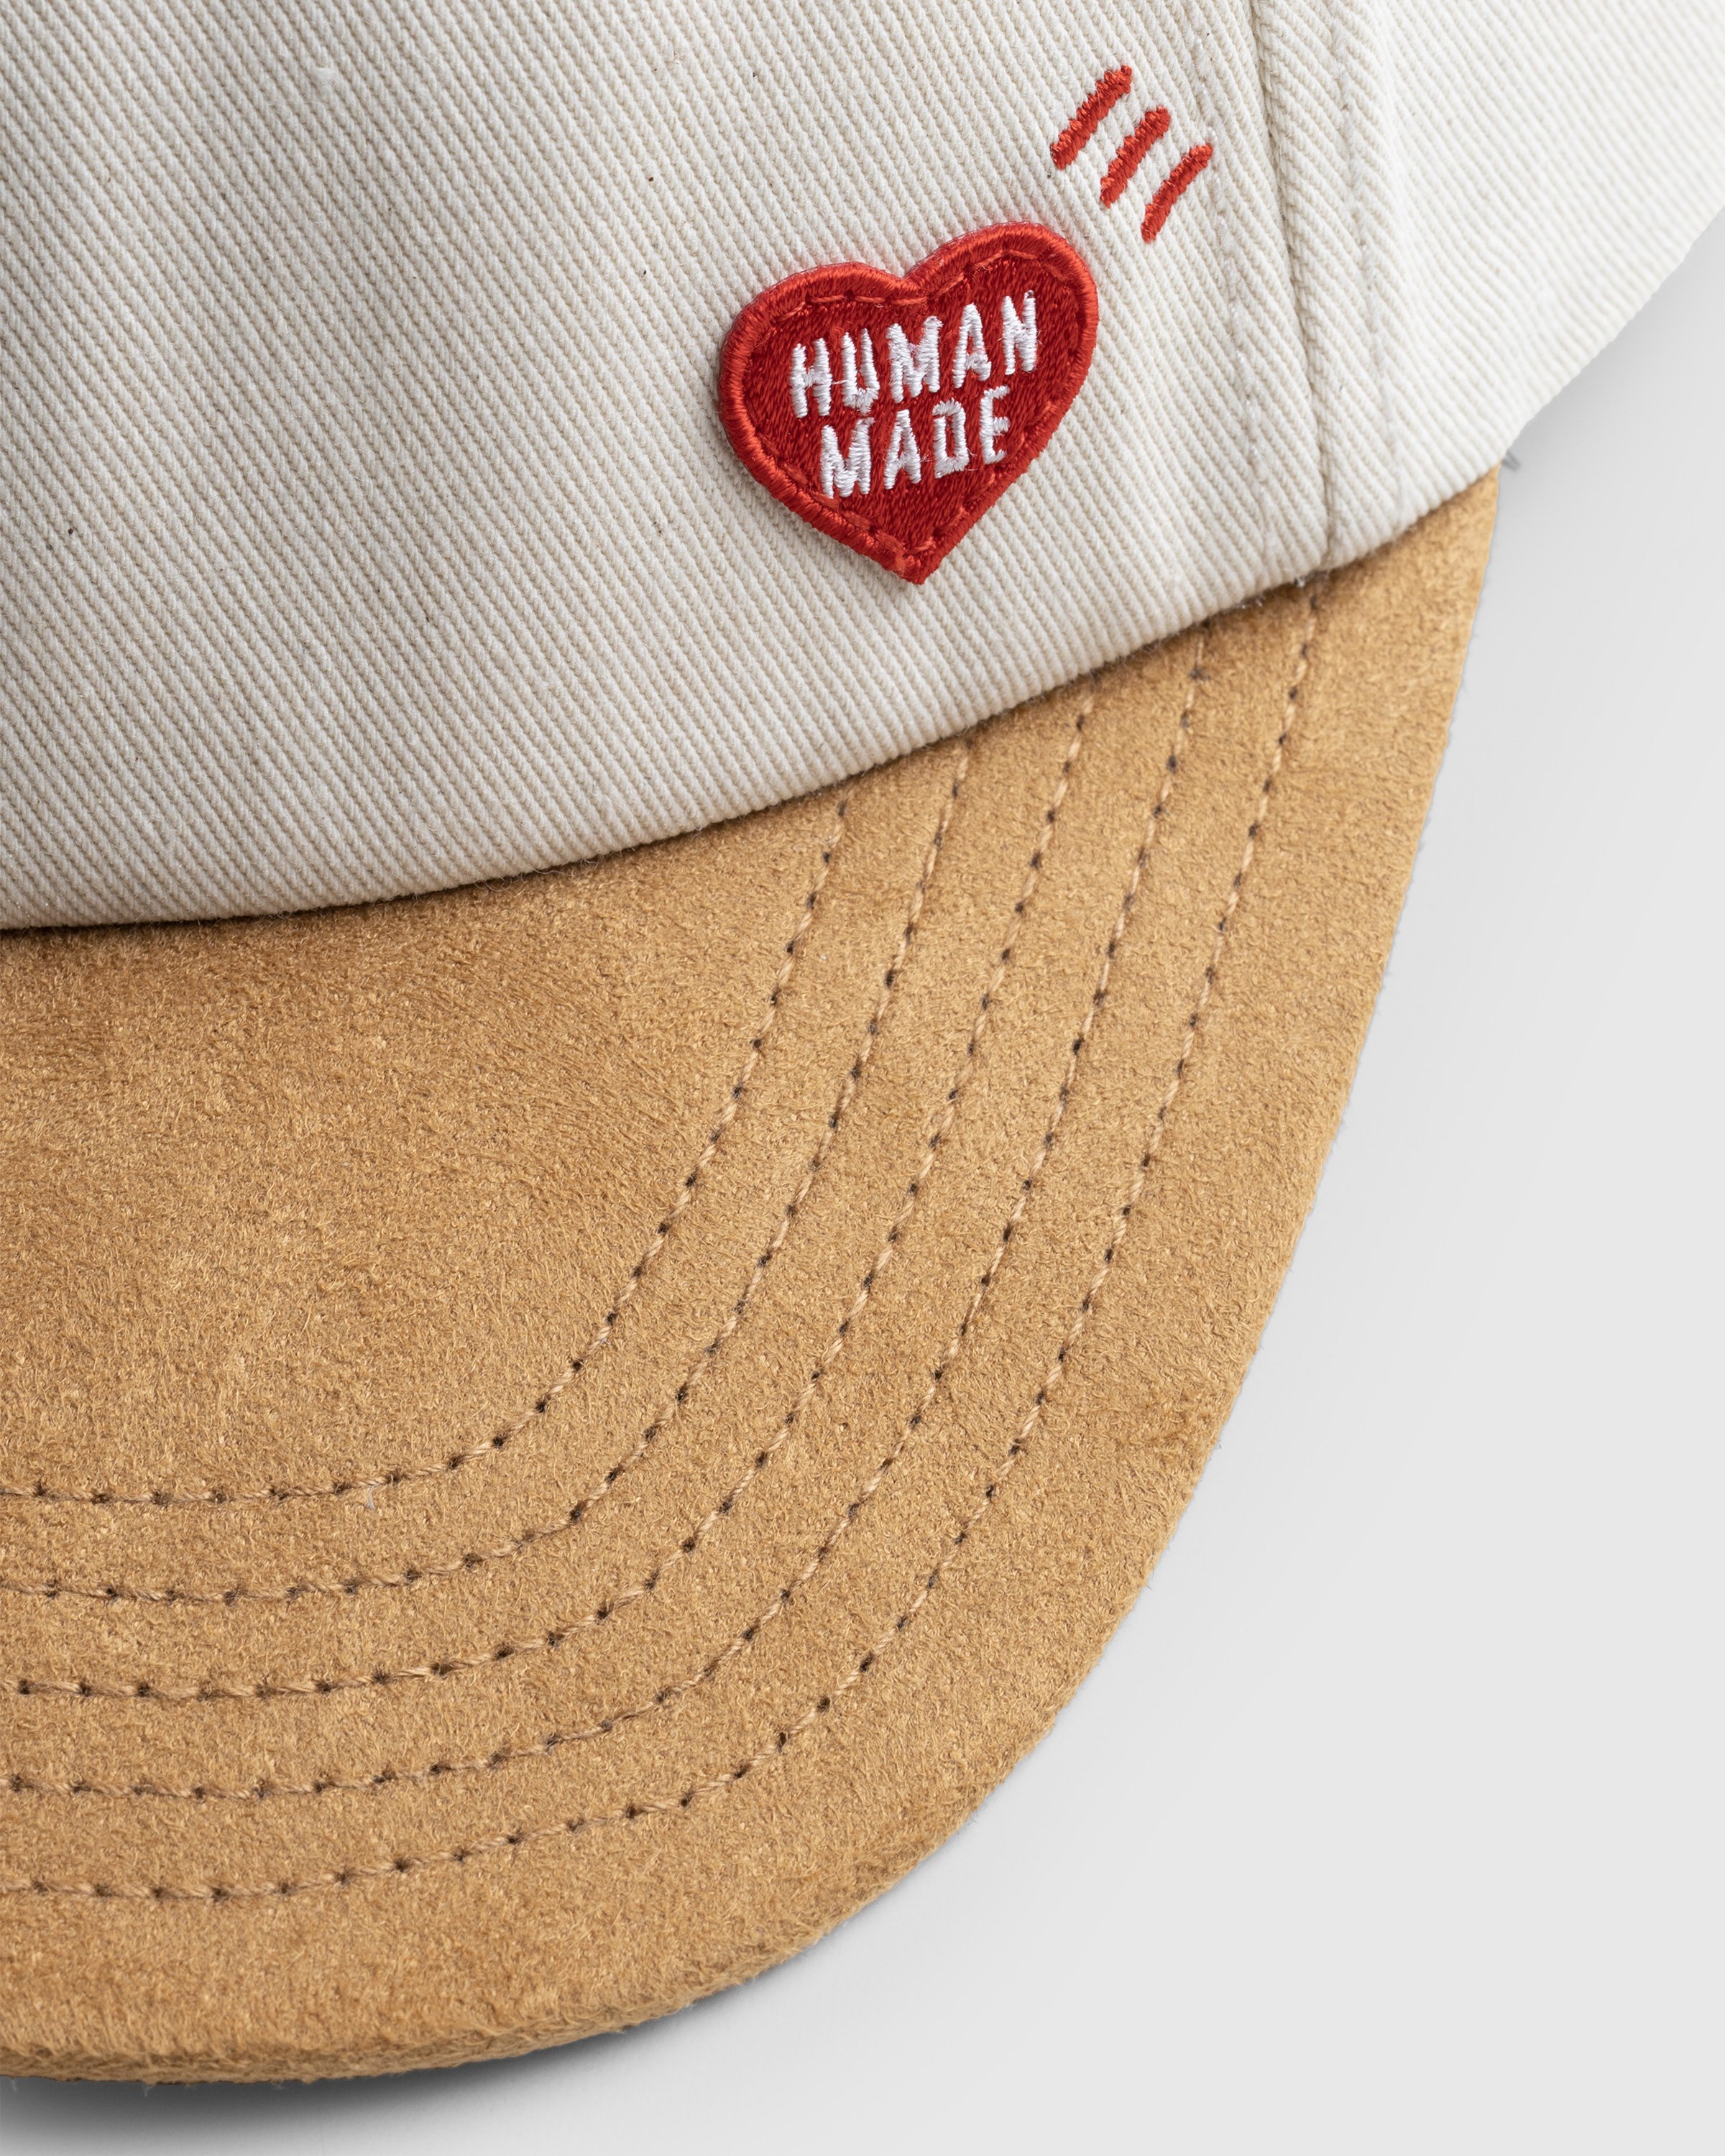 Human Made - 6-Panel Twill Cap White - Accessories - White - Image 6